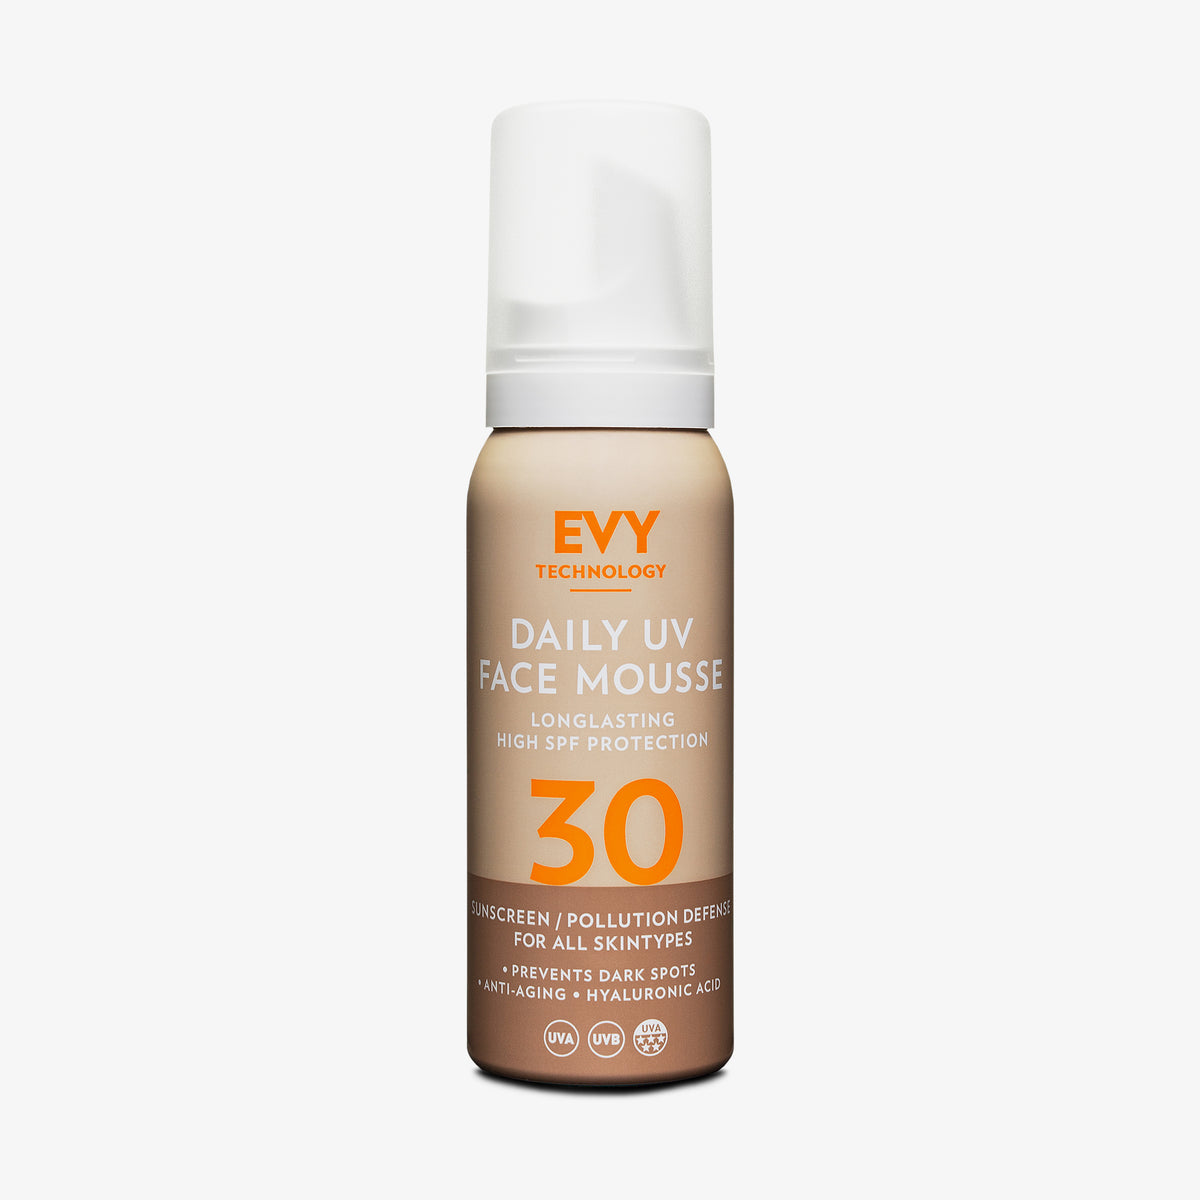 Daily UV Face Mousse SPF 30